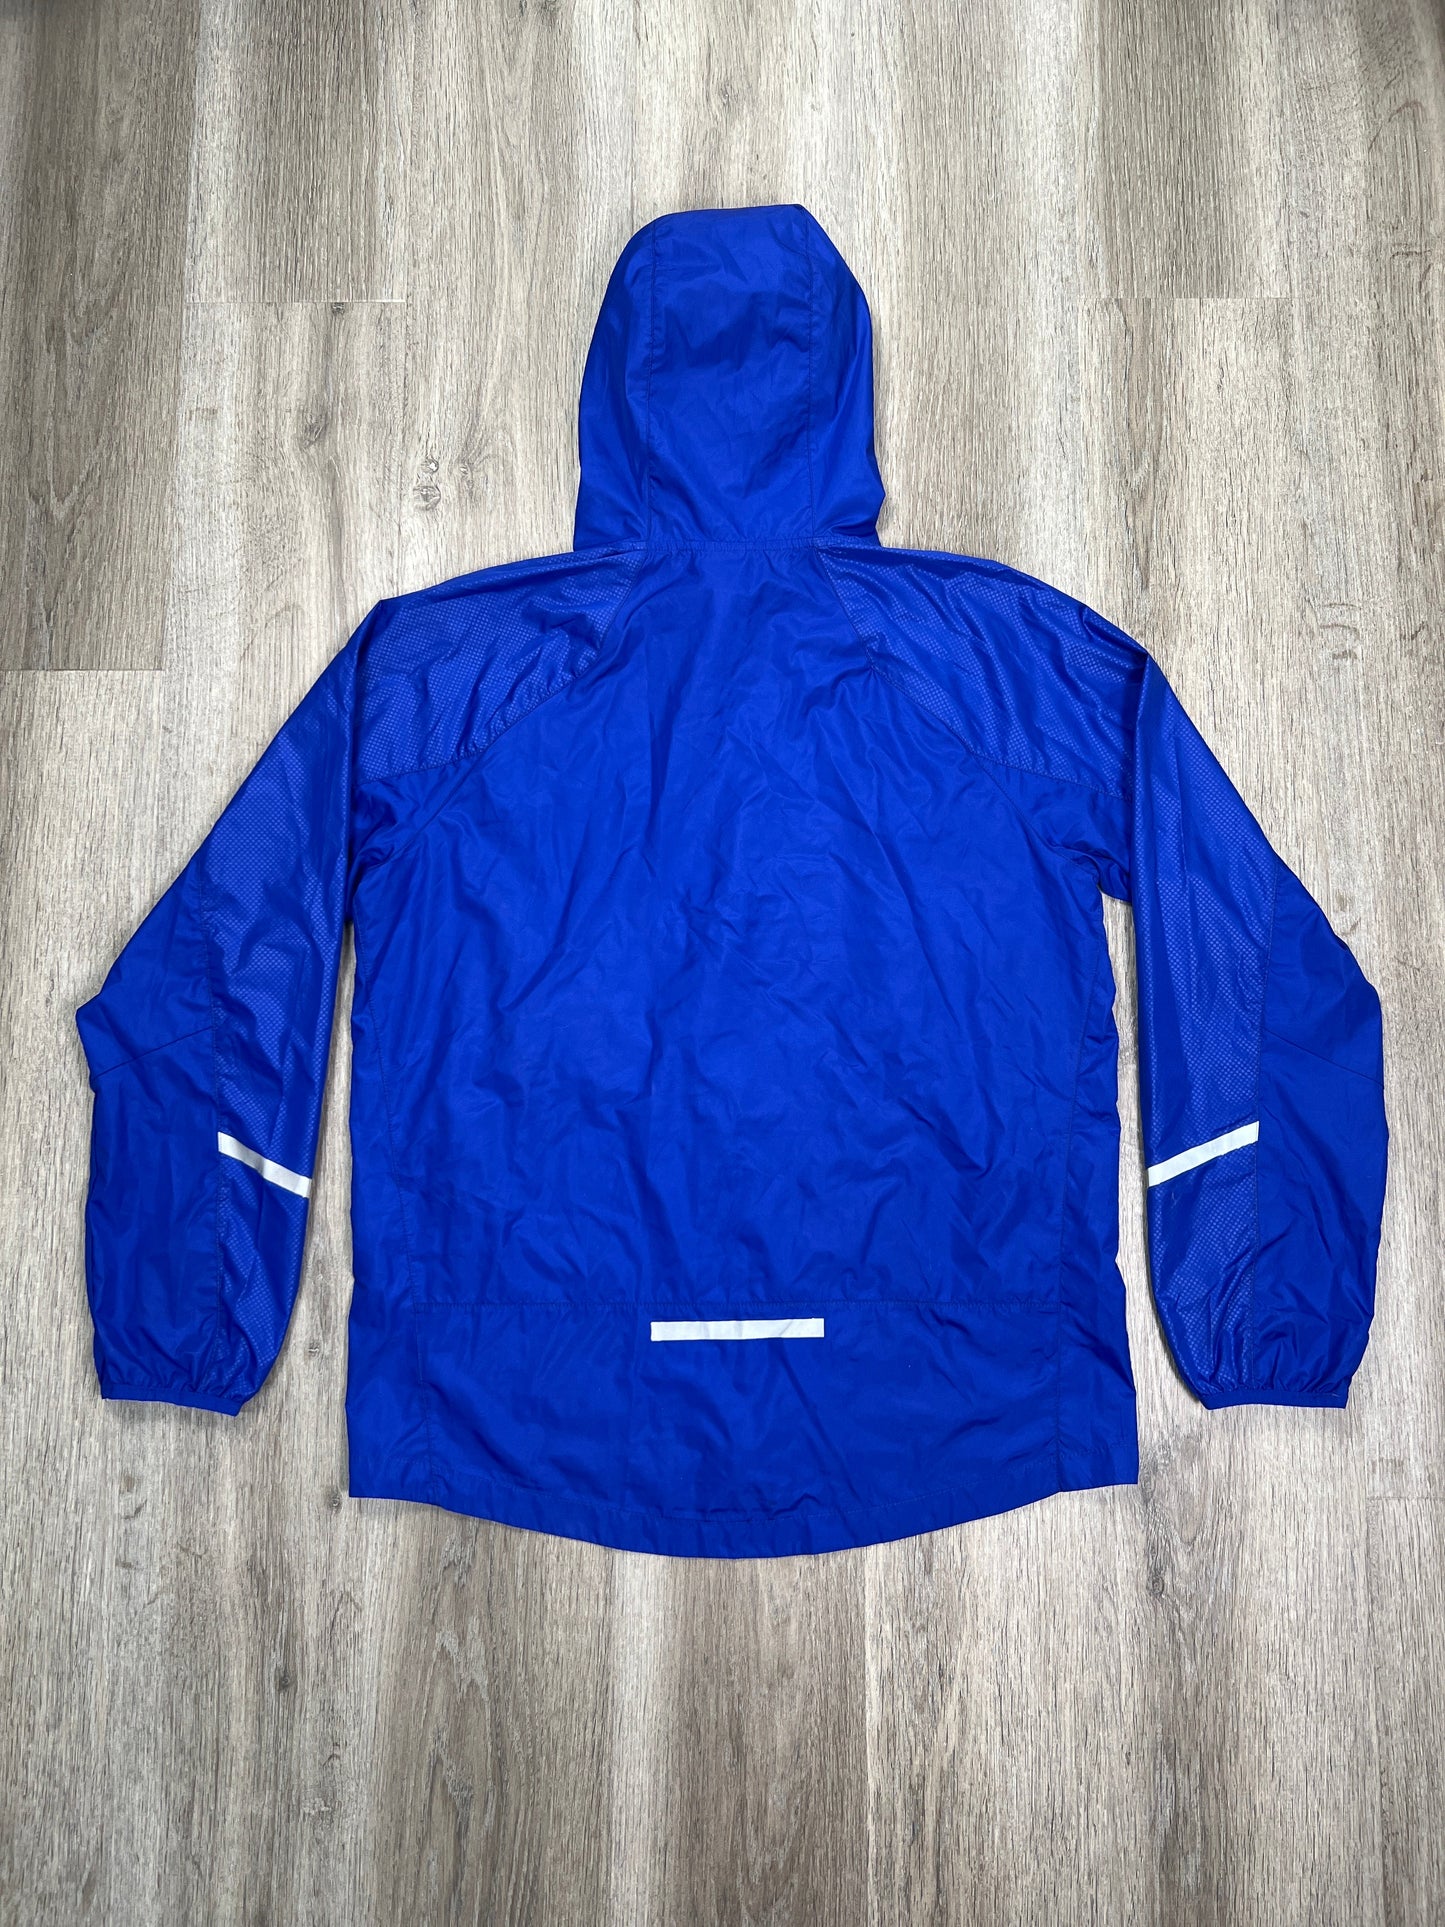 Jacket Other By Russel Athletic  Size: M